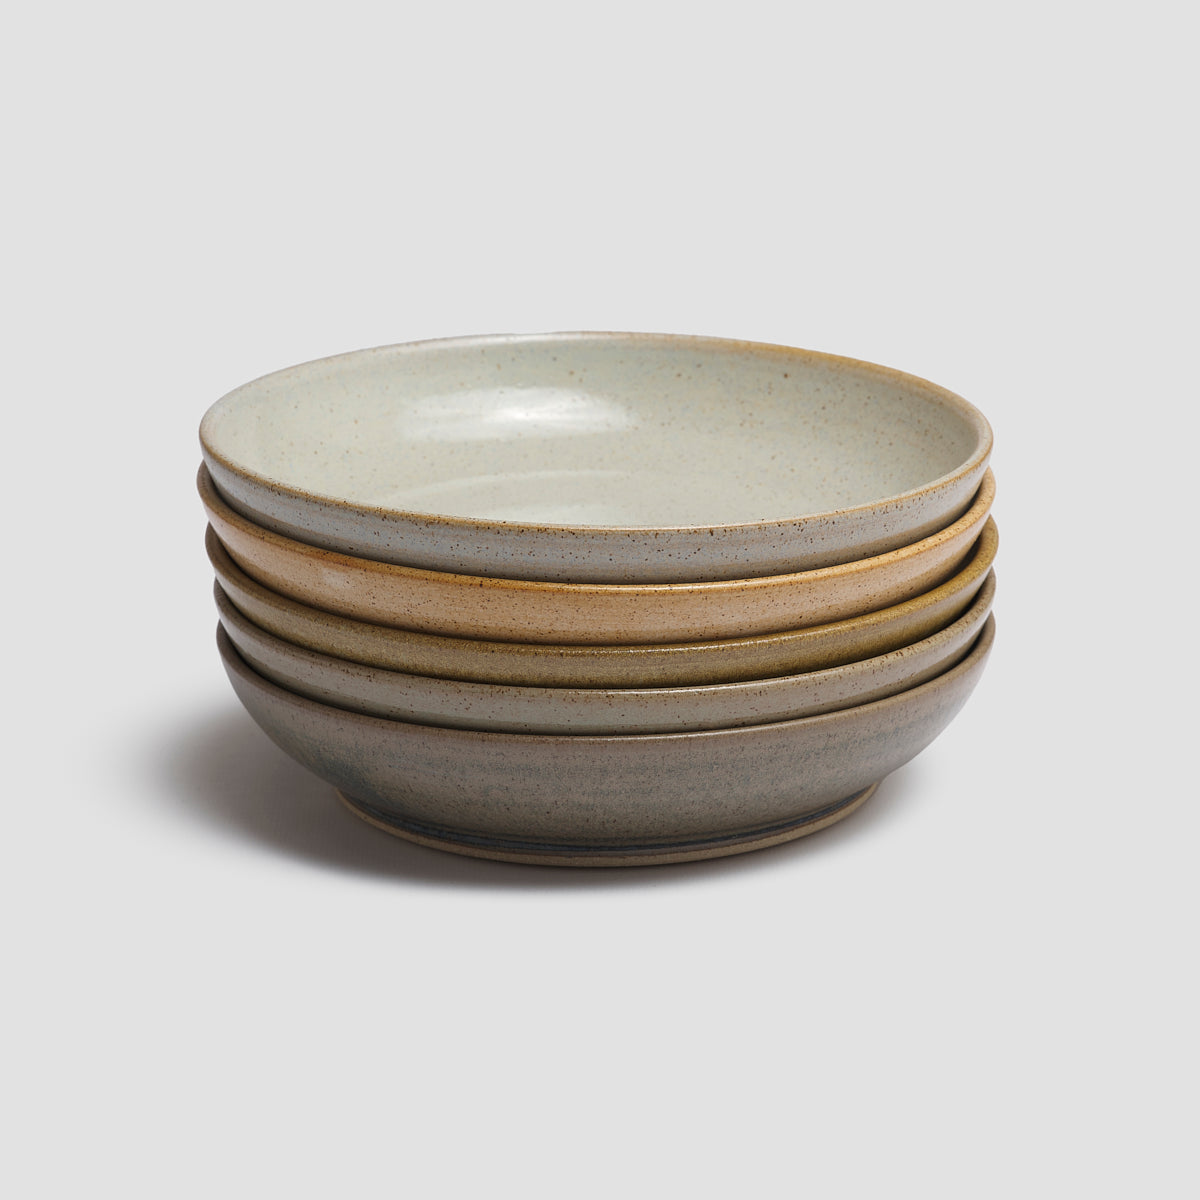 Pottery West Dinner Bowls in Powder, Sand, Ochre, Olive, and Nori